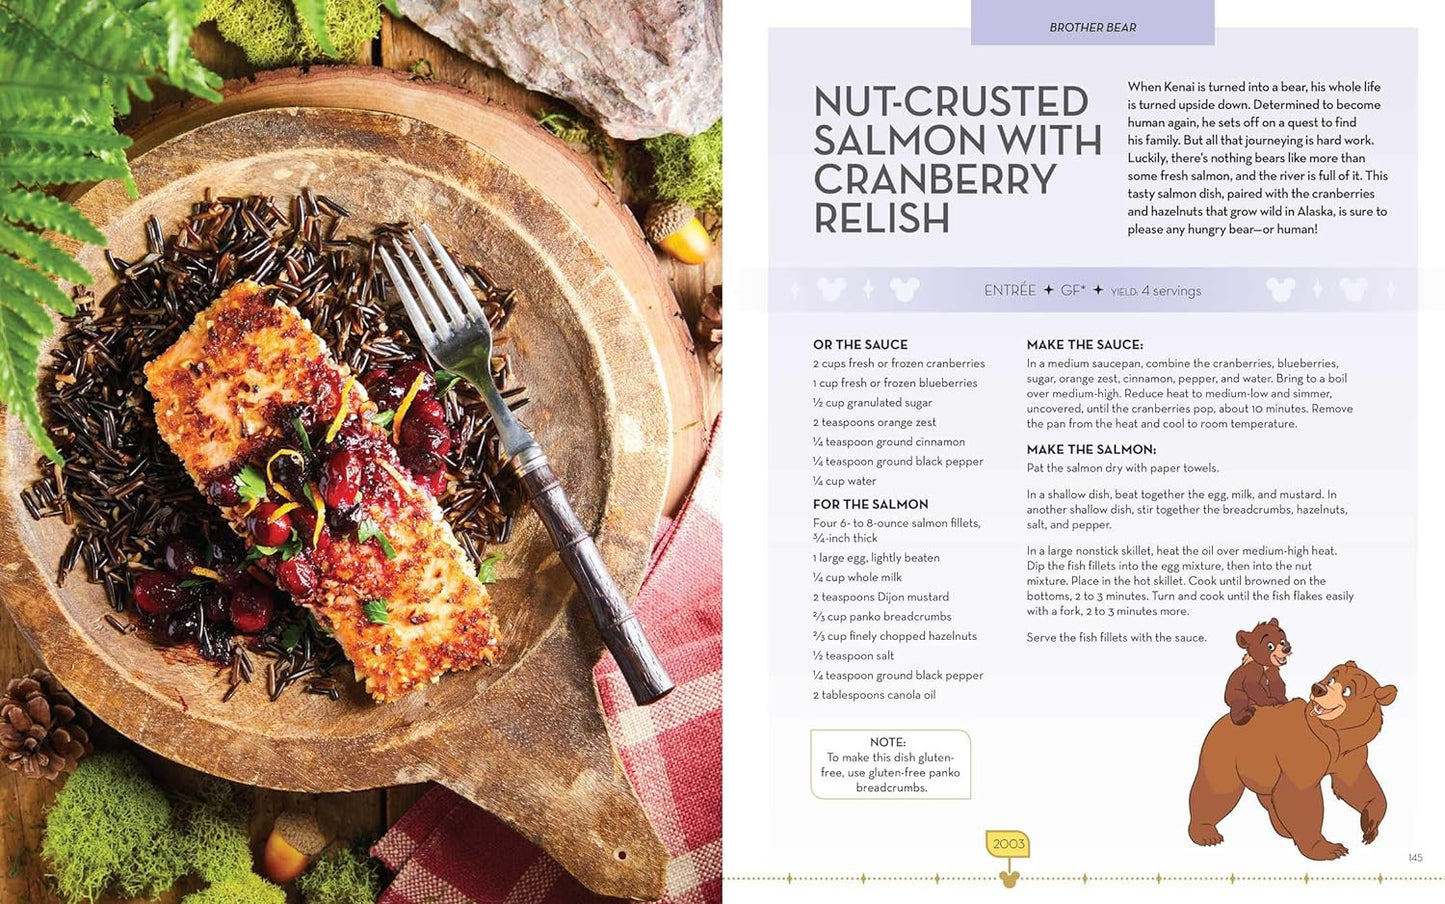 A two-page spread from the book. On the left is a wooden plate with a piece of cooked salmon on it, surrounded by red relish. On the right is a recipe for nut-crusted salmon with cranberry relish.